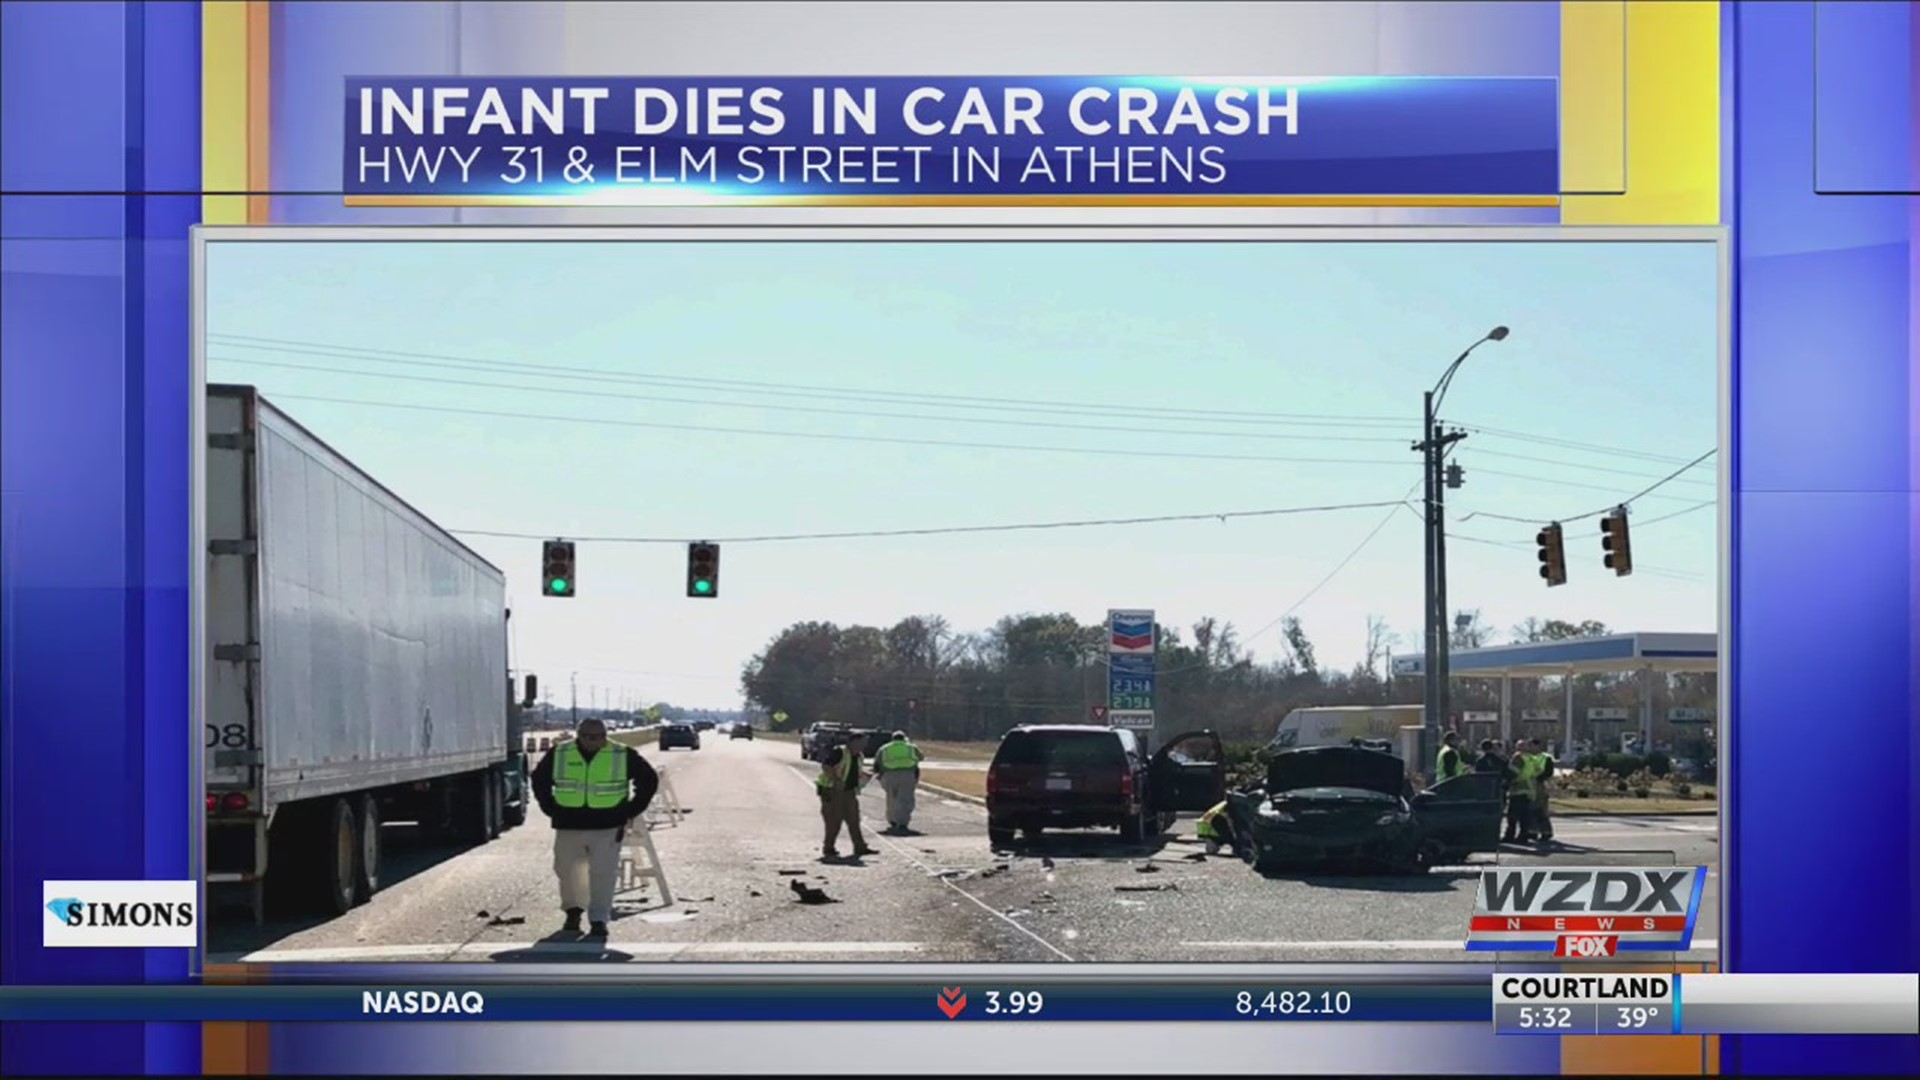 A three-vehicle wreck in Athens on Wednesday injured three people and took the life of an 11-month old.
Athens Police confirmed Everly Derringer was killed in the crash. She was 11-months old. One of the injured individuals was transported to Huntsville Hospital and everyone else was transported to Athens Limestone Hospital.